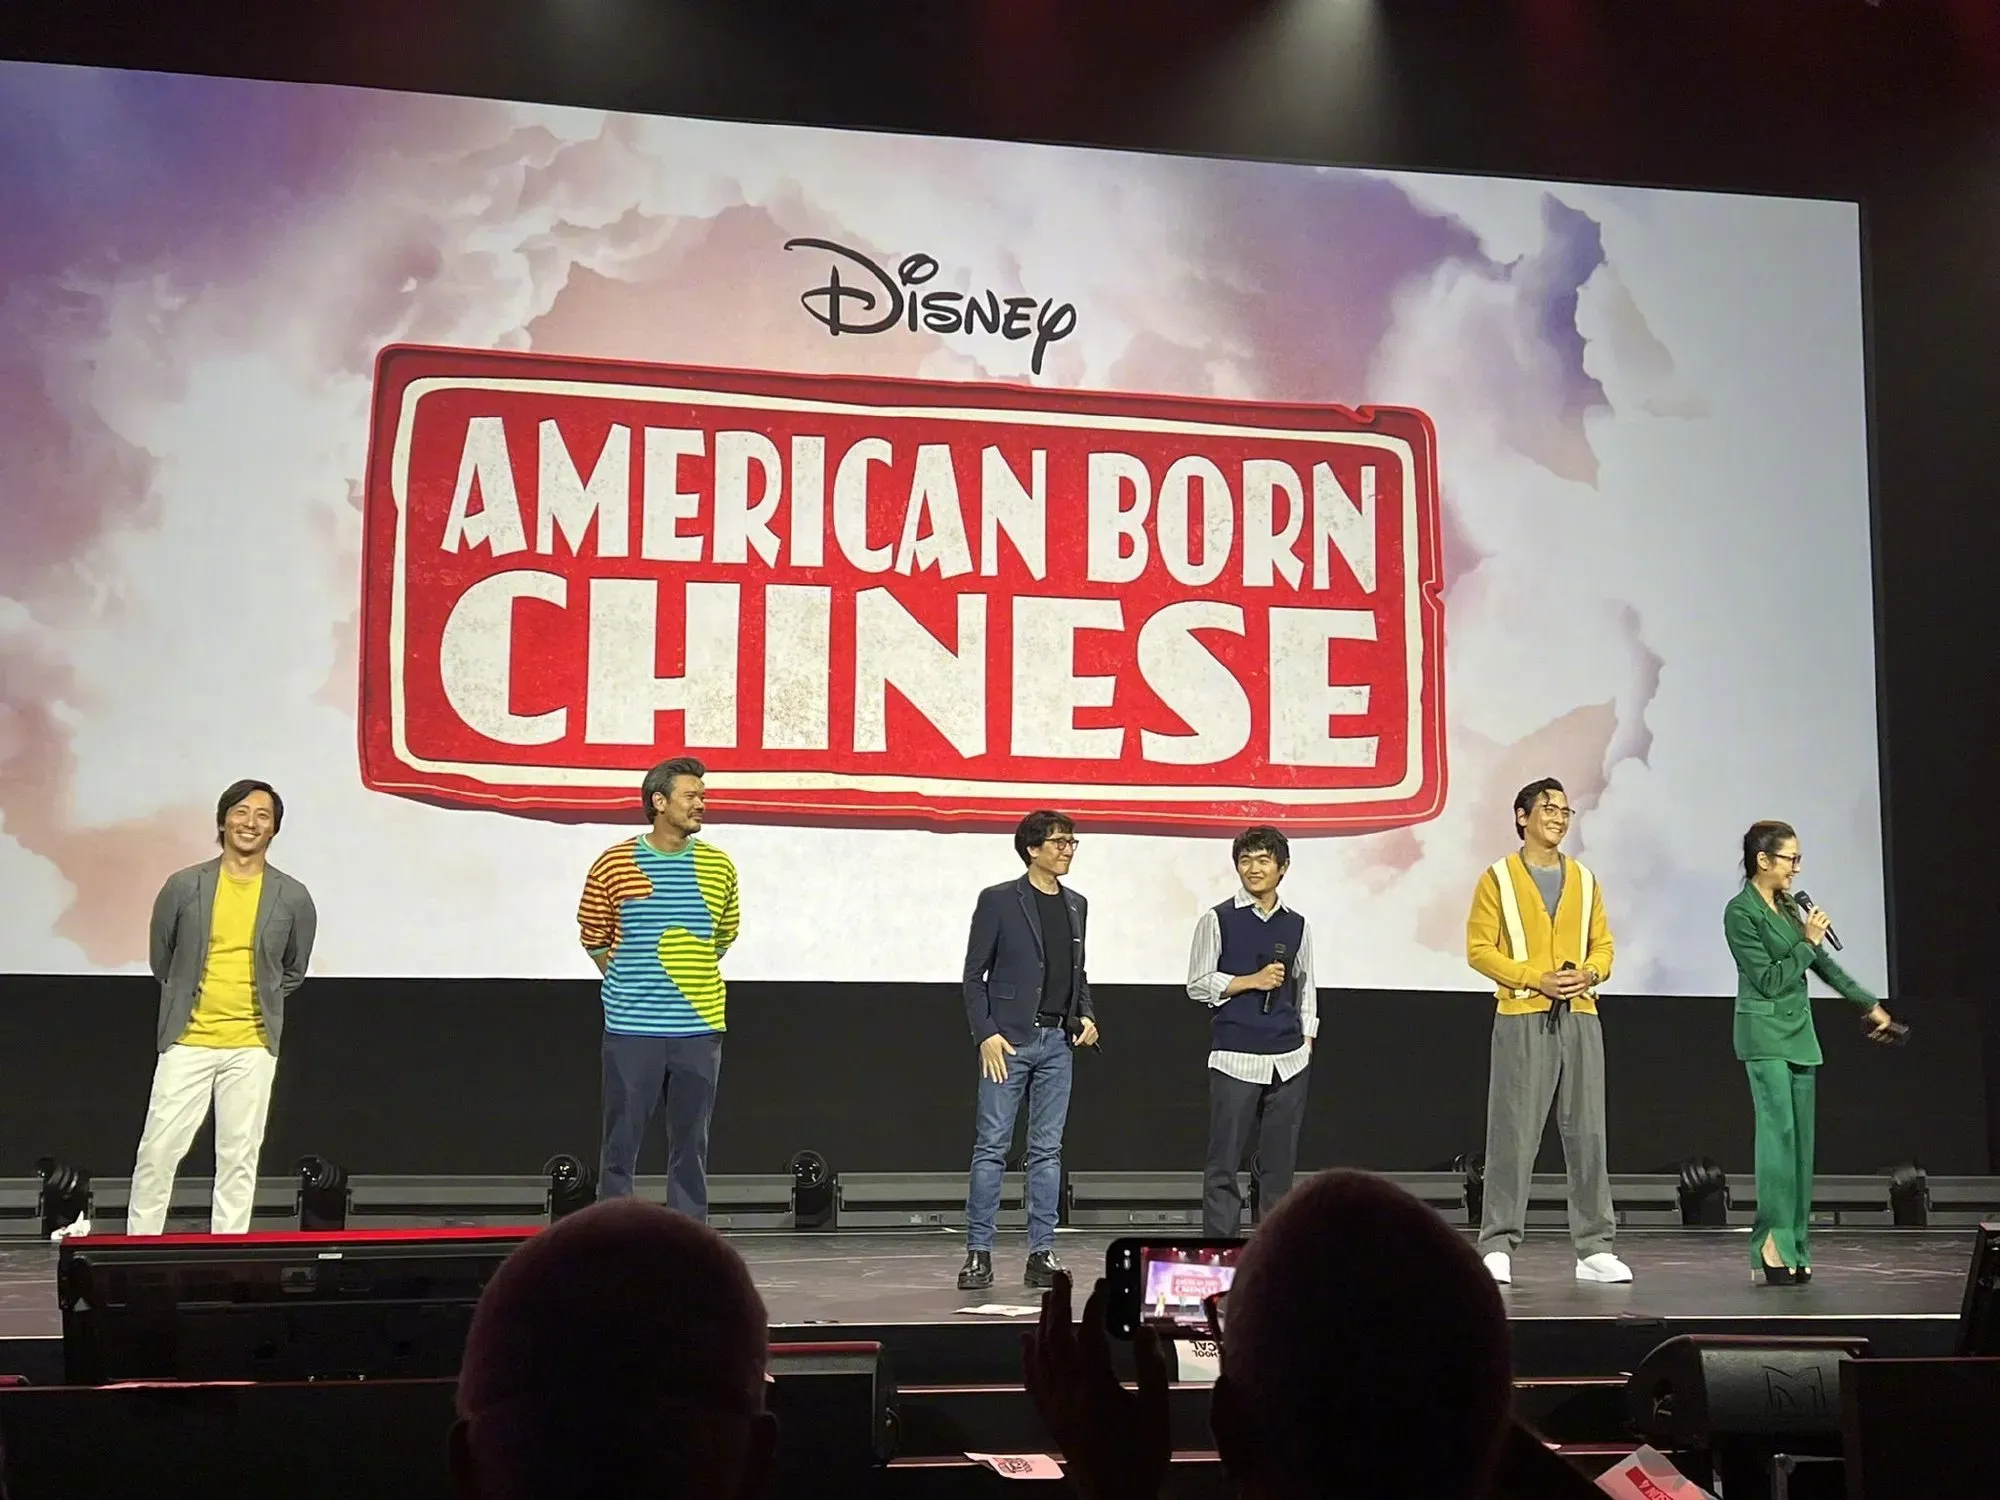 Disney+ new drama 'American Born Chinese' releases special on D23, creators introduce the show | FMV6